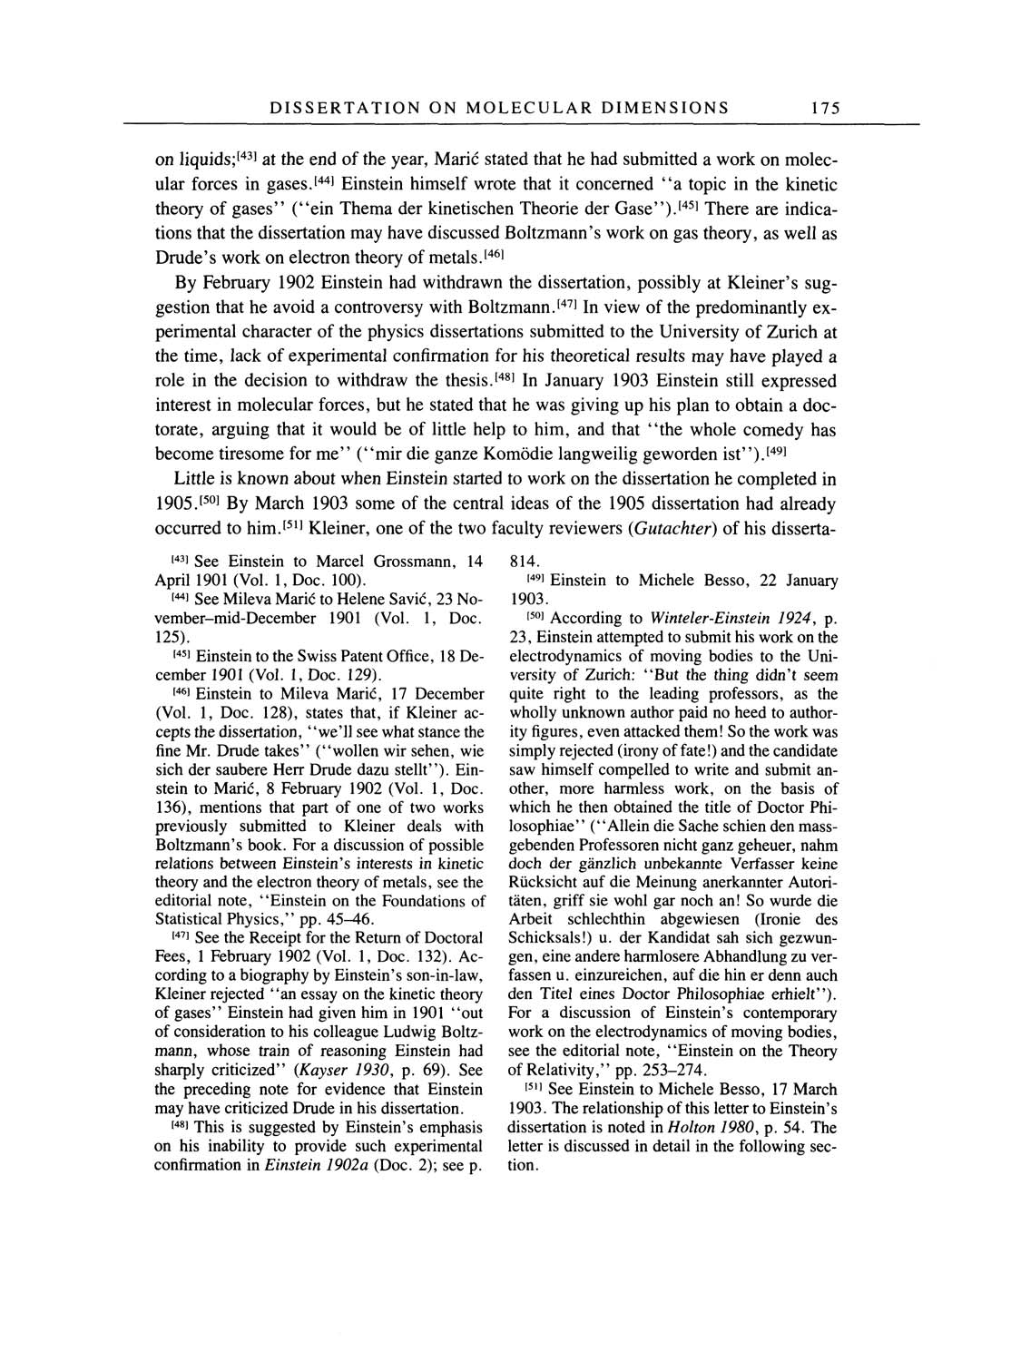 Volume 2: The Swiss Years: Writings, 1900-1909 page 175